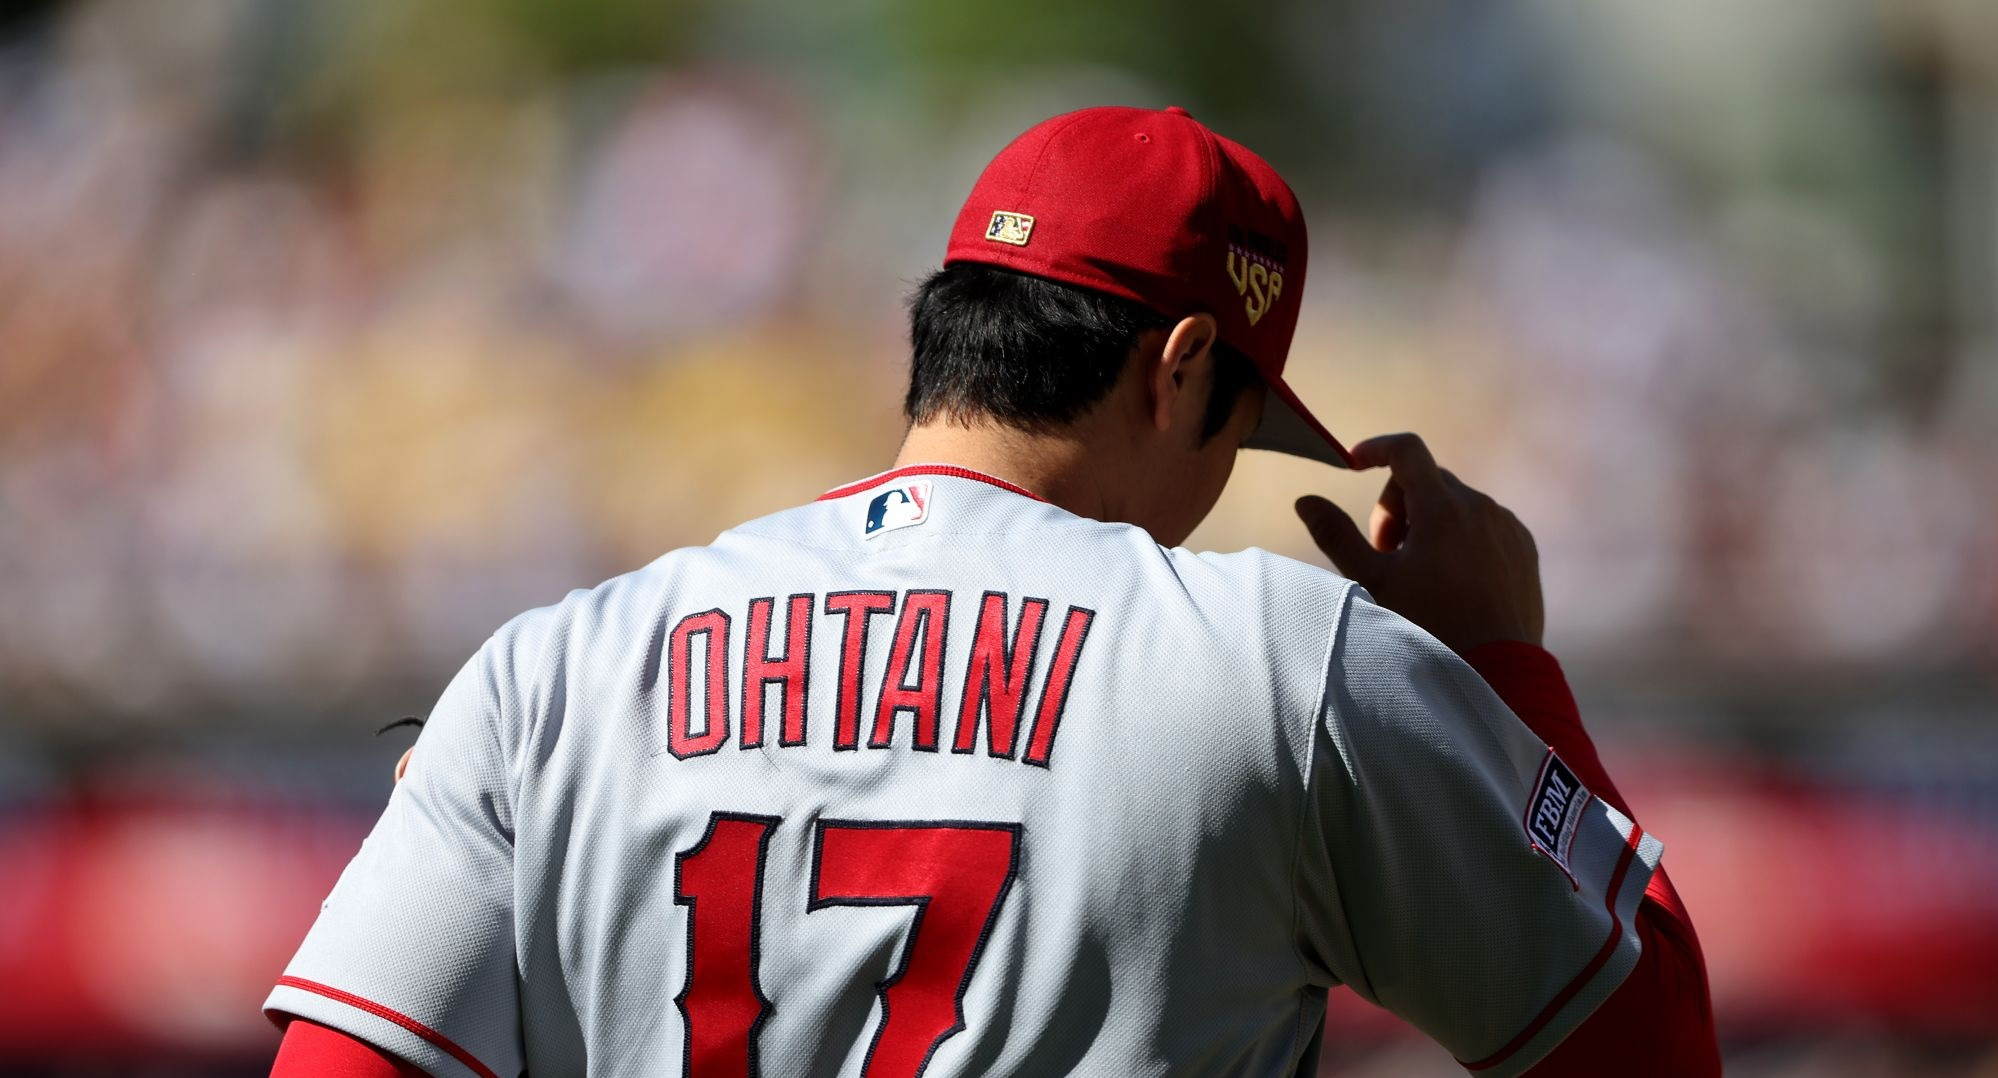 Shohei Ohtani reaches his 29 years in the middle of an injury that will not allow him to show all his repertoire